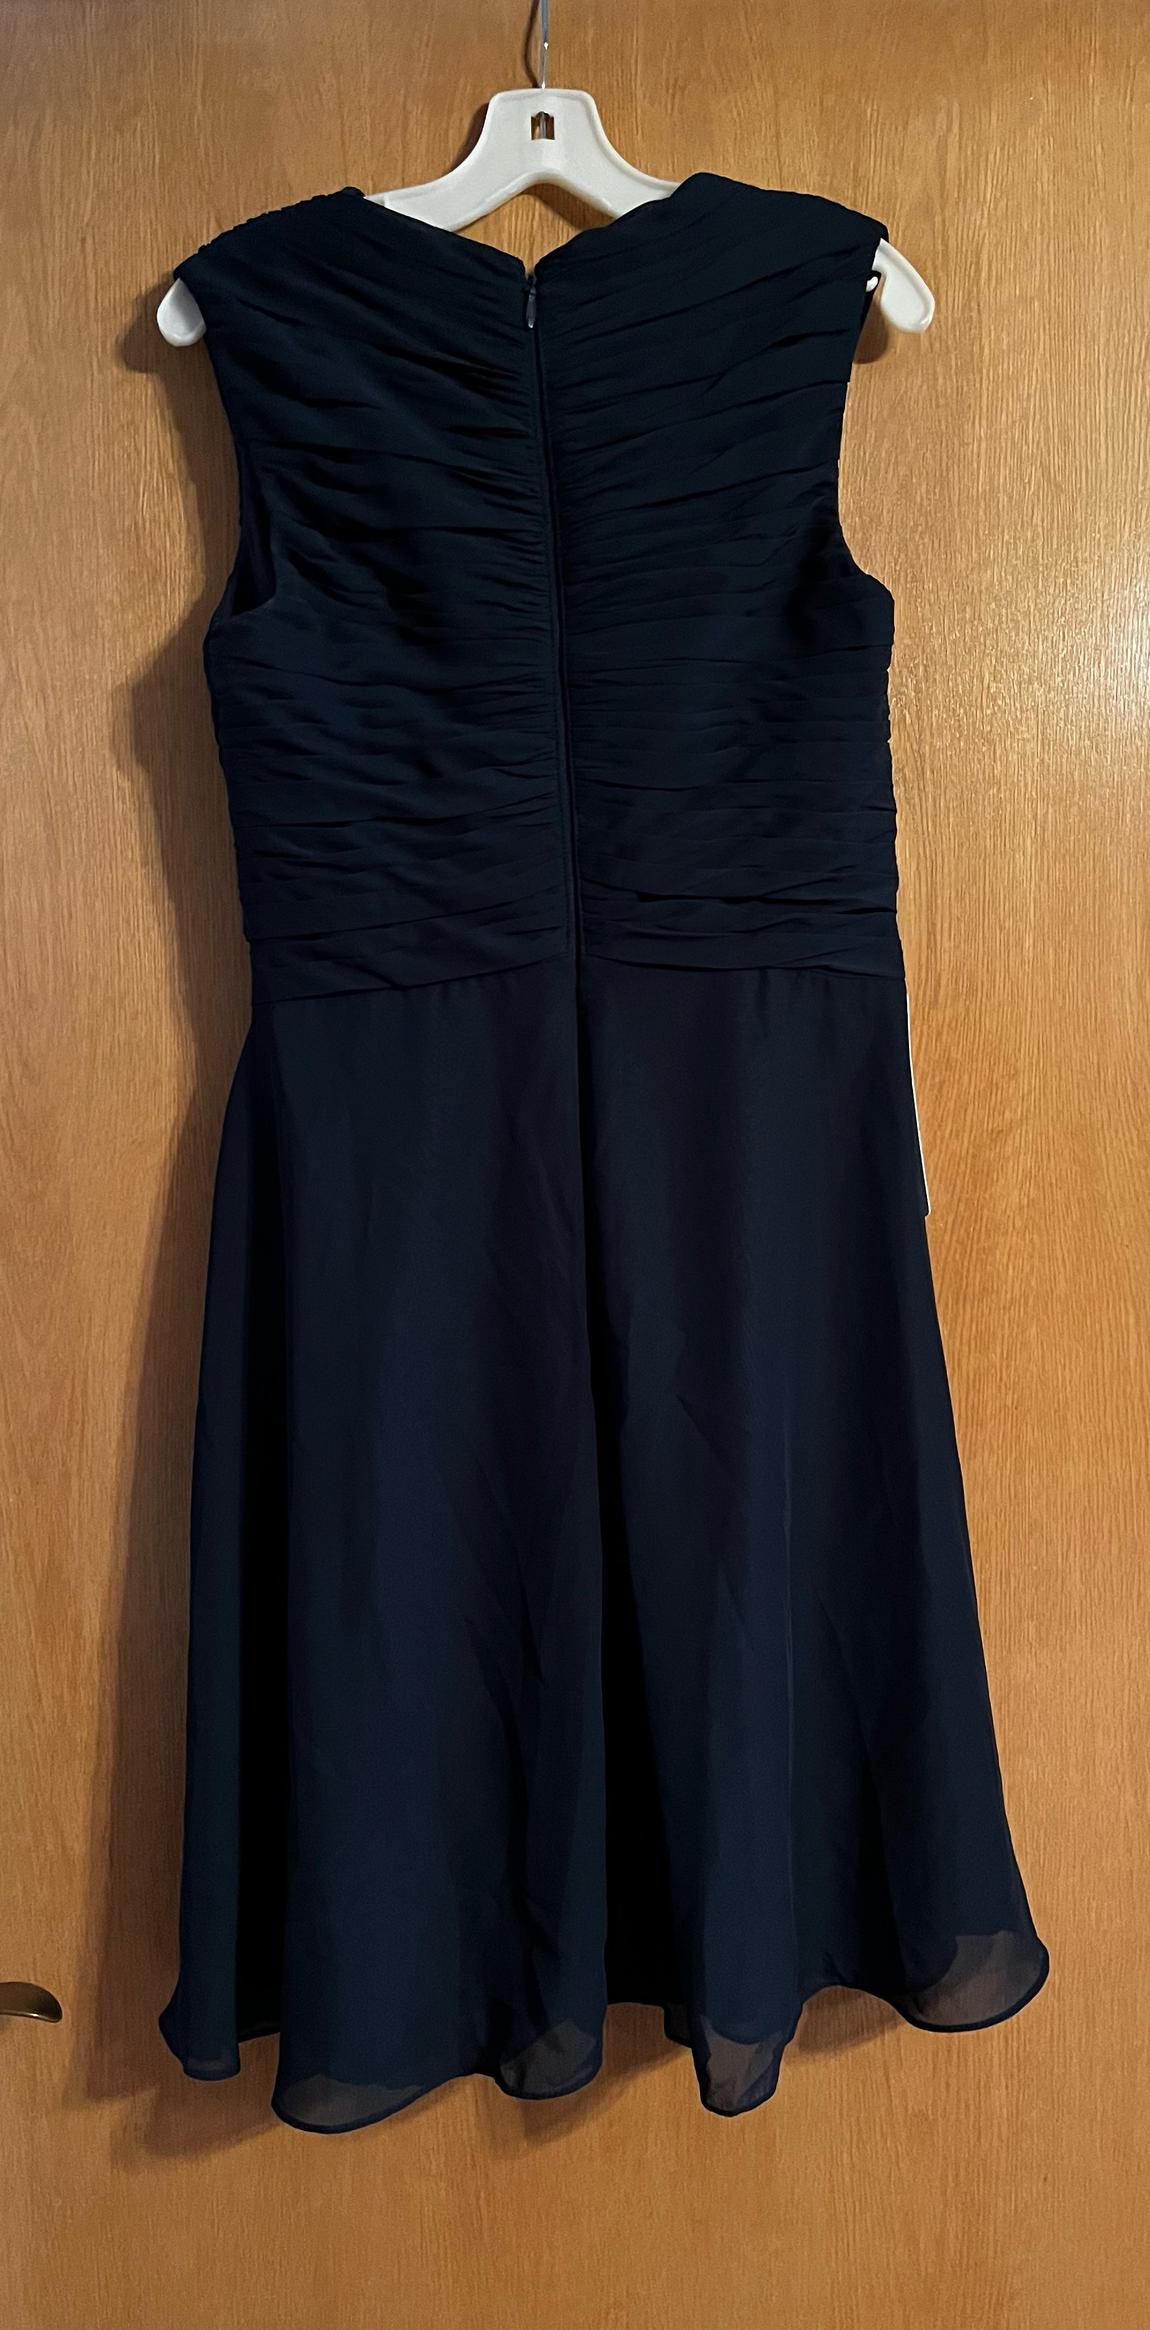 Azazie/ David’s Bridal Size 10 Navy Blue A-line Dress on Queenly